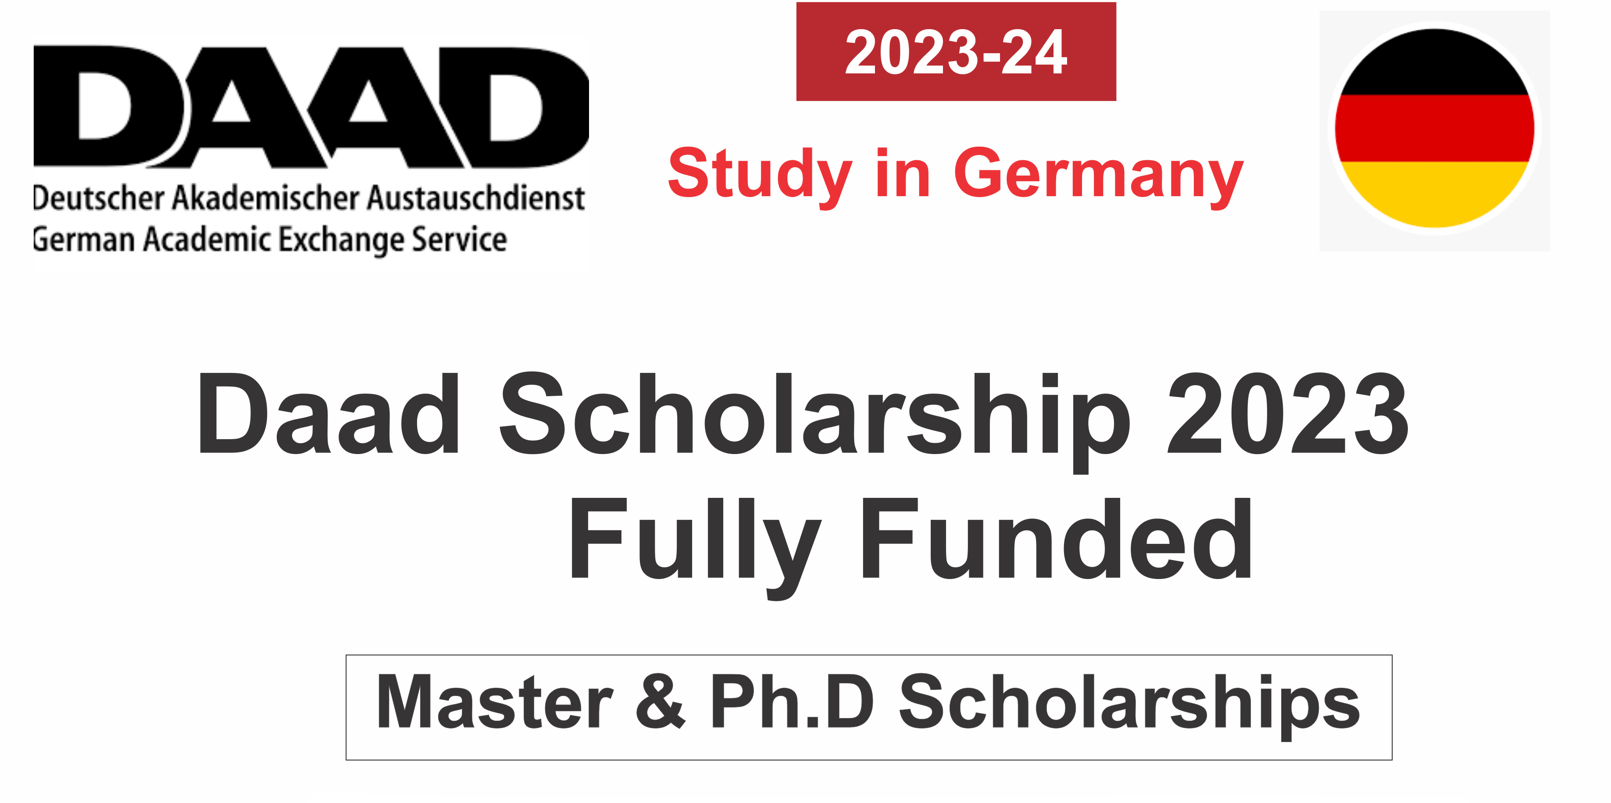 DAAD International Scholarship 2023 in Germany Fully Funded | How to Apply